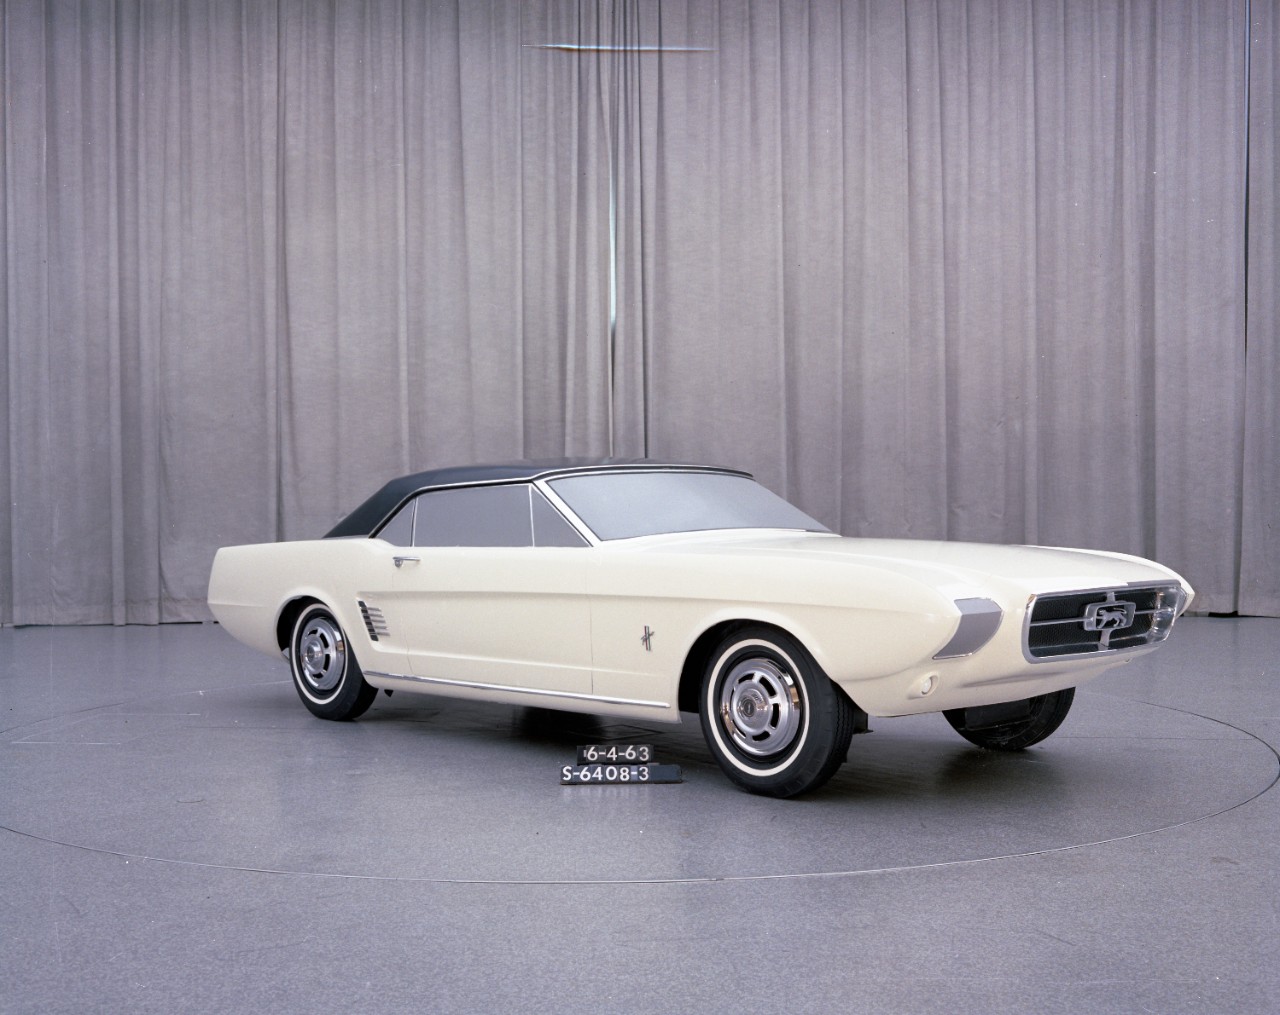 Ford Mustang, Photo Gallery: Pre-Production Ford Mustangs (1962-1964), ClassicCars.com Journal